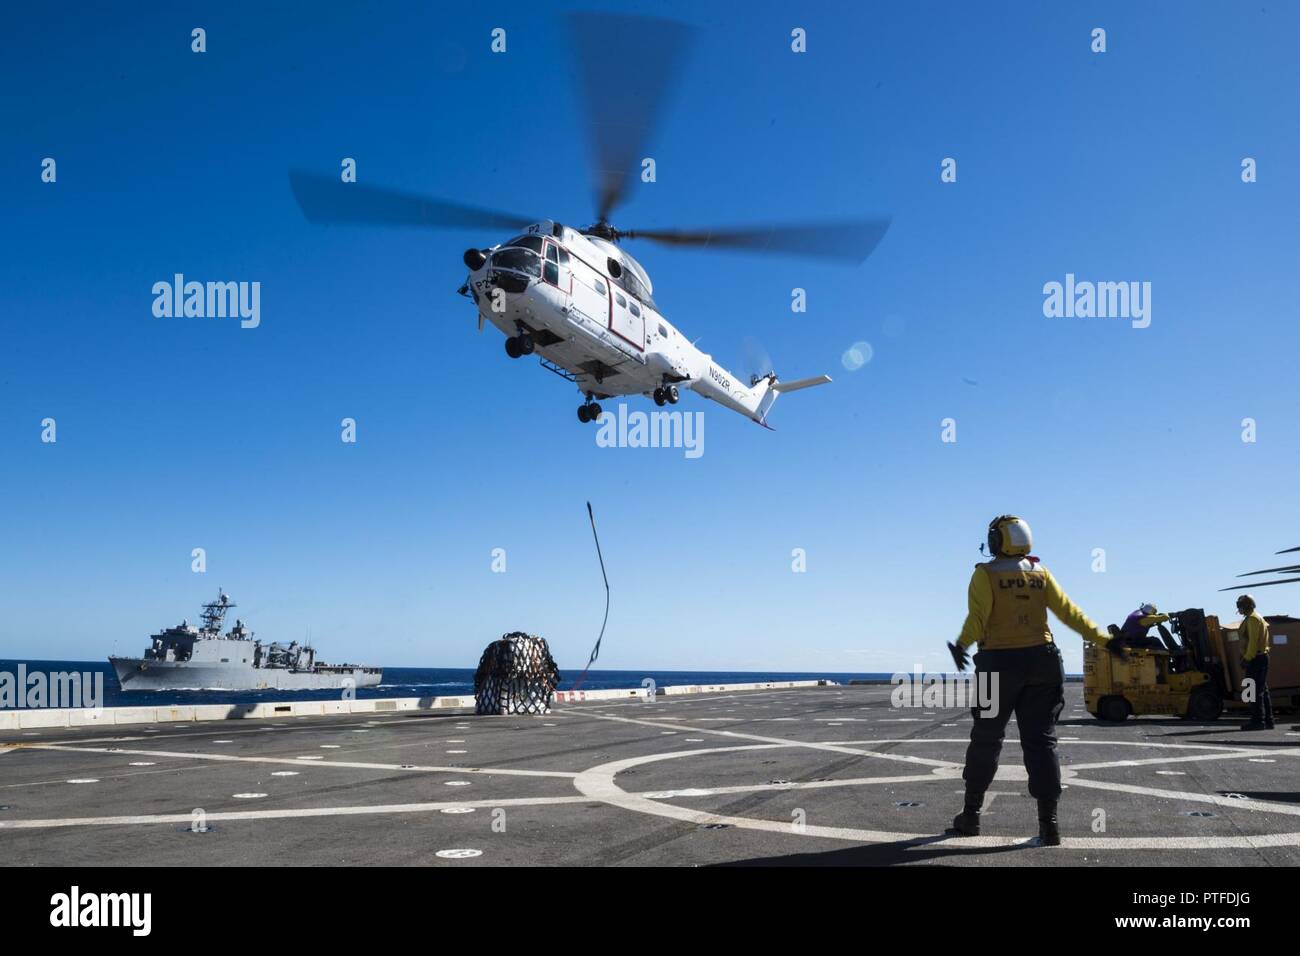 CORAL SEA (July 21, 2017) Aviation Boatswain’s Mate (Handling) 3rd Class Julia Valles, from Mesa, Ariz., directs a SA-330J Puma helicopter, assigned to the Military Sealift Command dry cargo and ammunition ship USNS Richard E. Byrd (T-AKE 4), to drop cargo on the flight deck of the amphibious transport dock USS Green Bay (LPD 20) with the amphibious dock landing USS Ashland (LSD 48) in the distance during a vertical replenishment as a part of Talisman Saber 17. Talisman Saber is a biennial U.S.-Australia bilateral exercise held off the coast of Australia meant to achieve interoperability and s Stock Photo